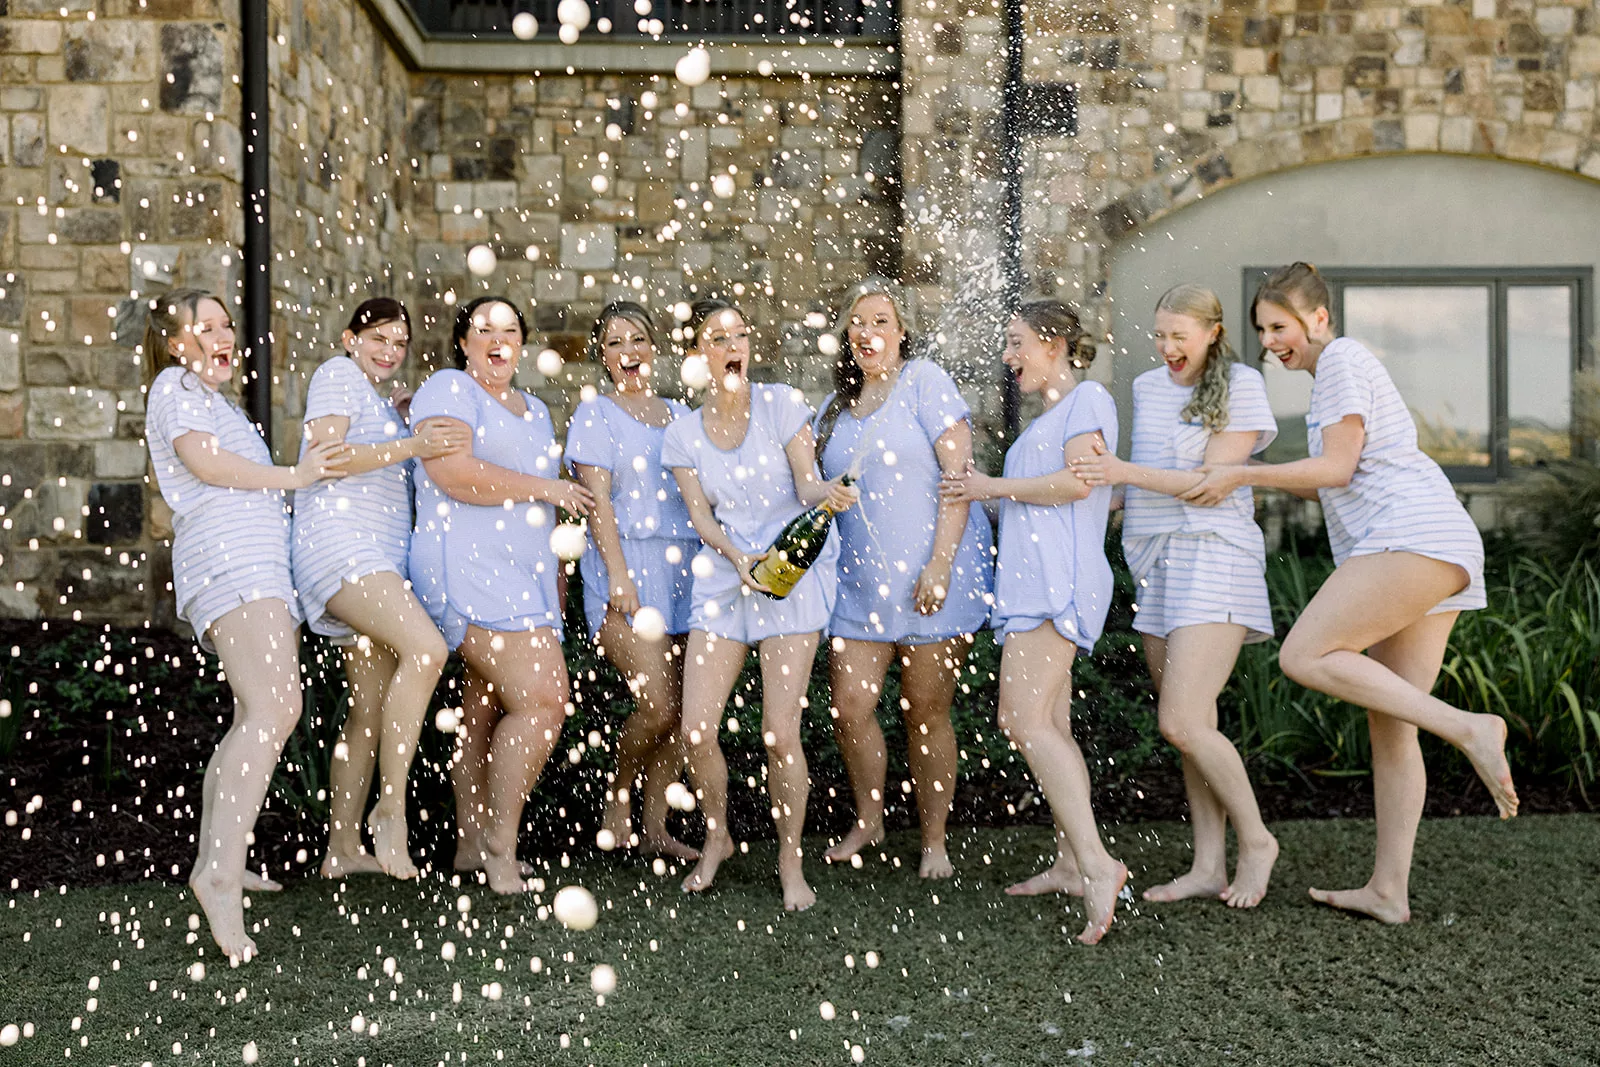 A bride pops a bottle of a champagne while wearing blue pajamas with her bridesmaids